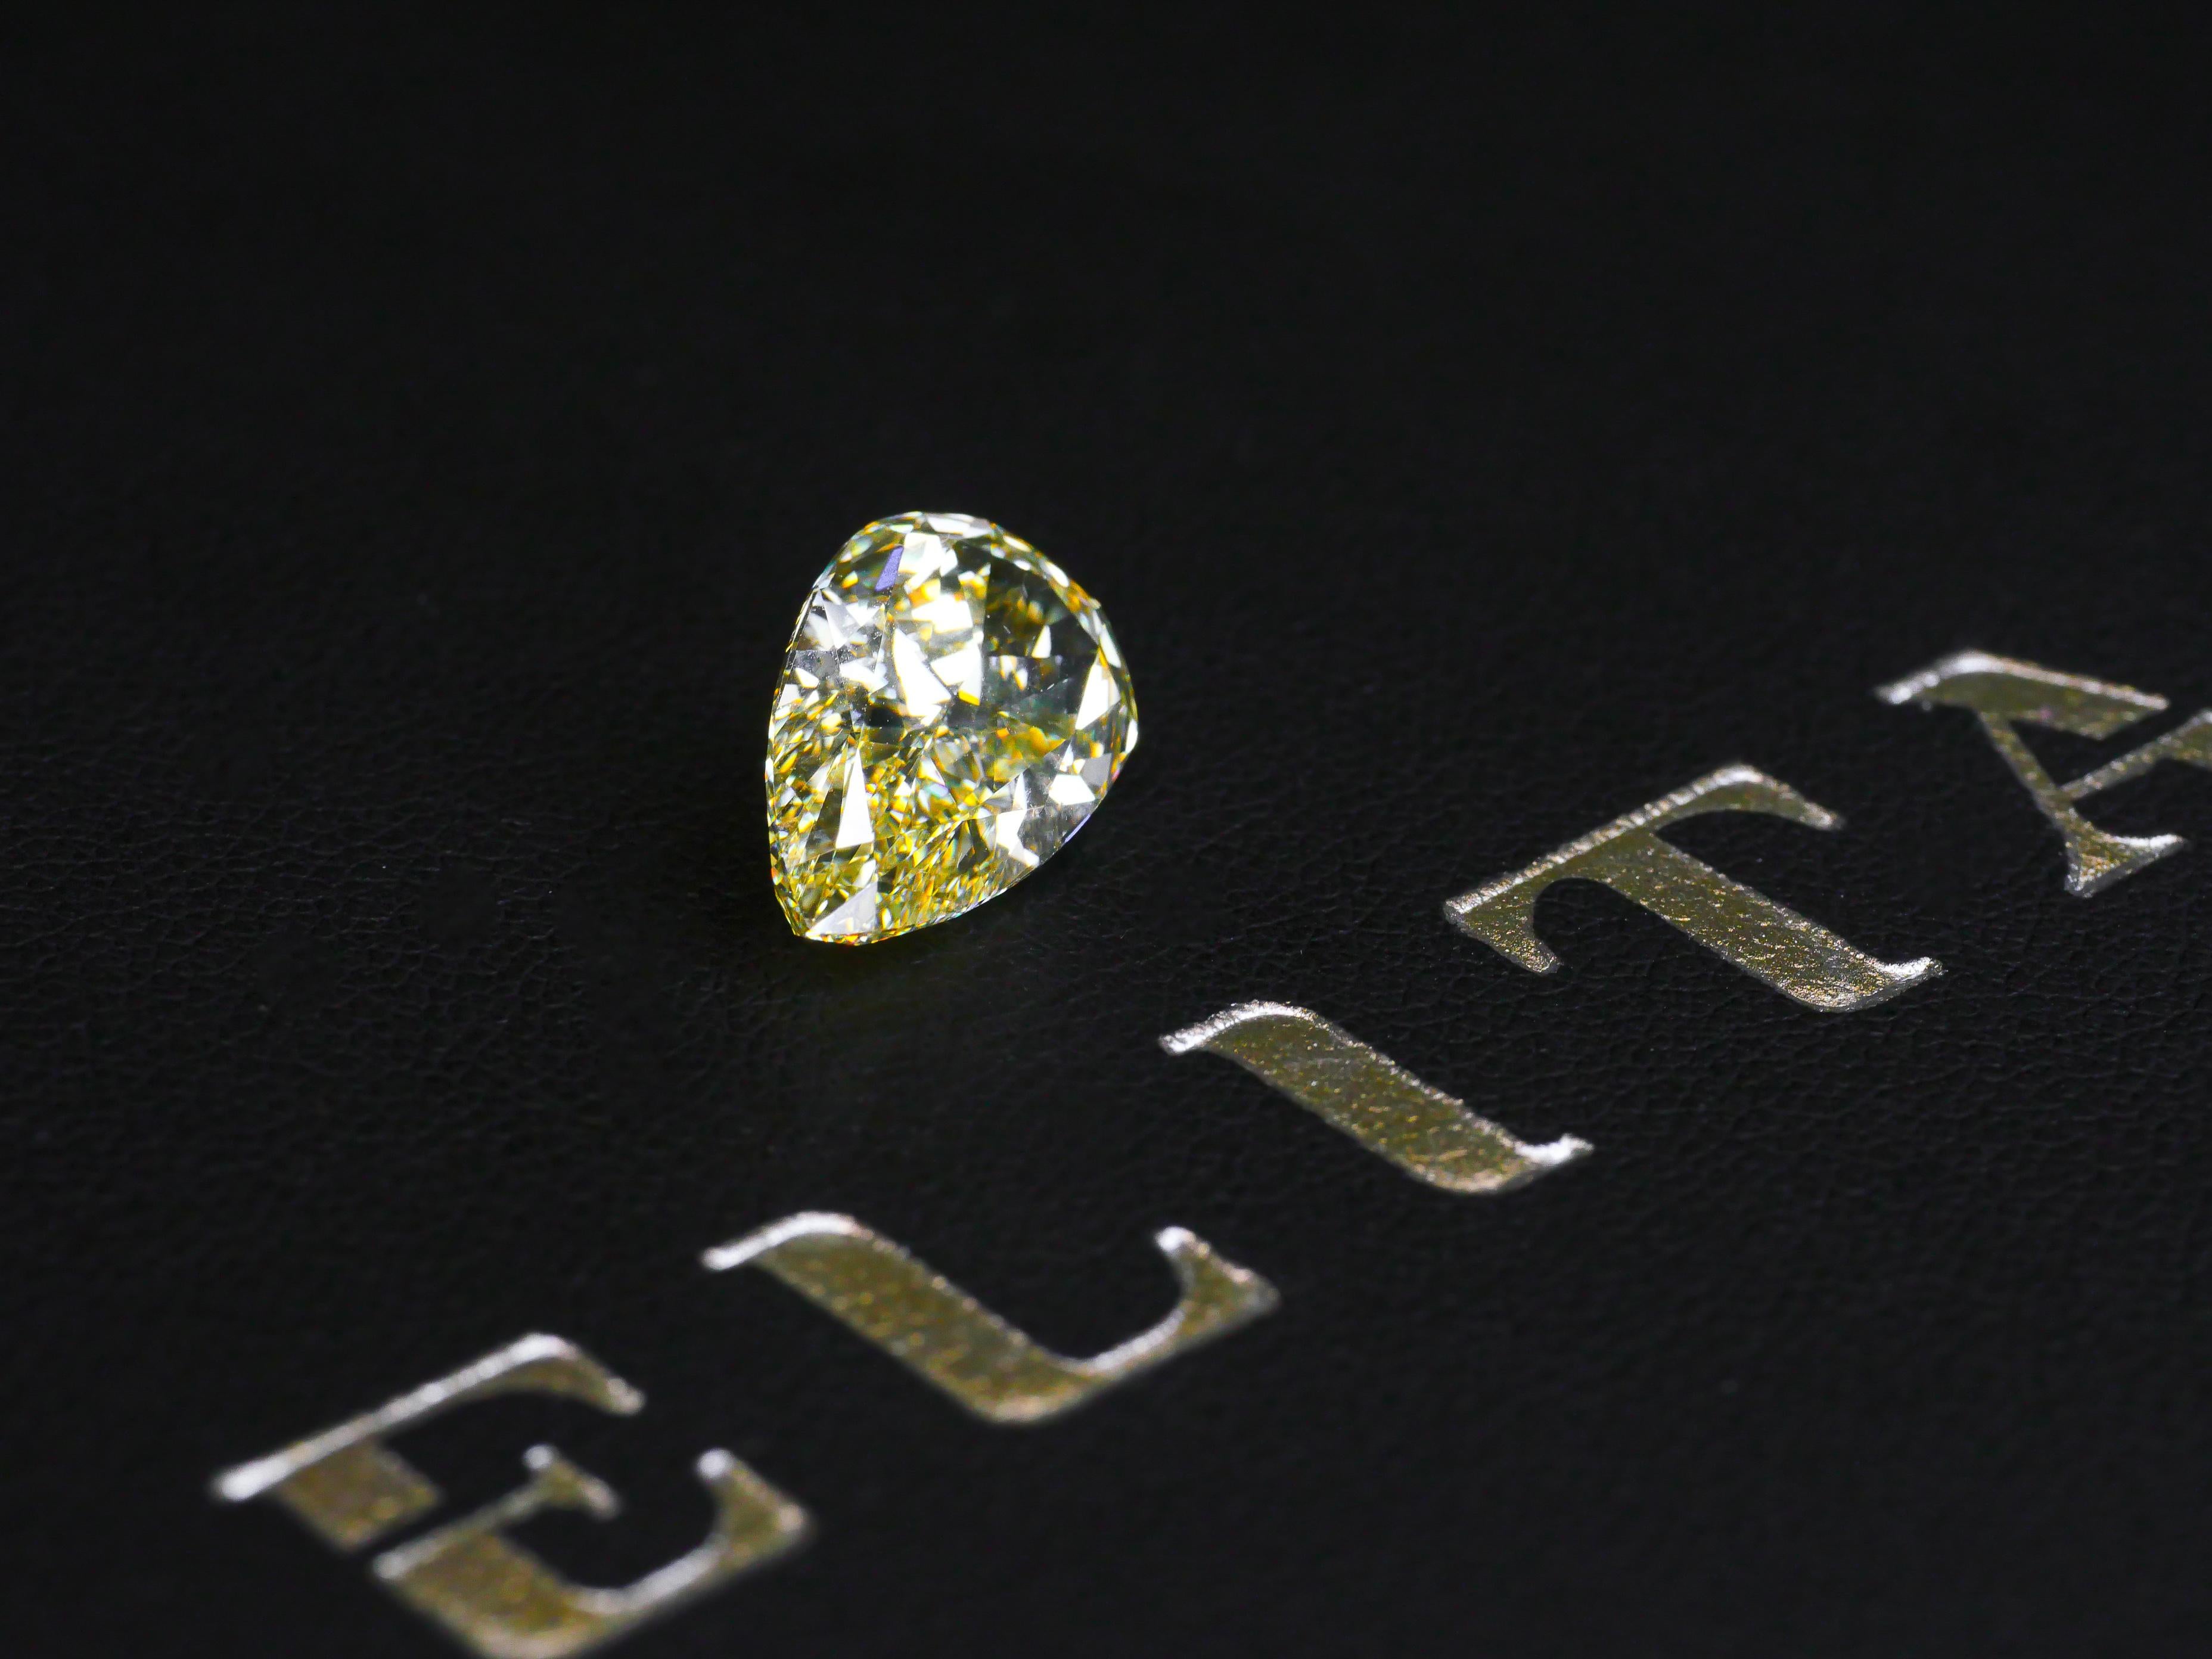 GIA Certified 5.06 Carat Fancy Yellow Pear Cut Diamond

Coloured diamonds are enormously rare, and ELITA DIAMONDS endeavours to discover the rarest of all – those displaying remarkably vibrant, Fancy Vivid hues. Our full spectrum of yellow diamonds,